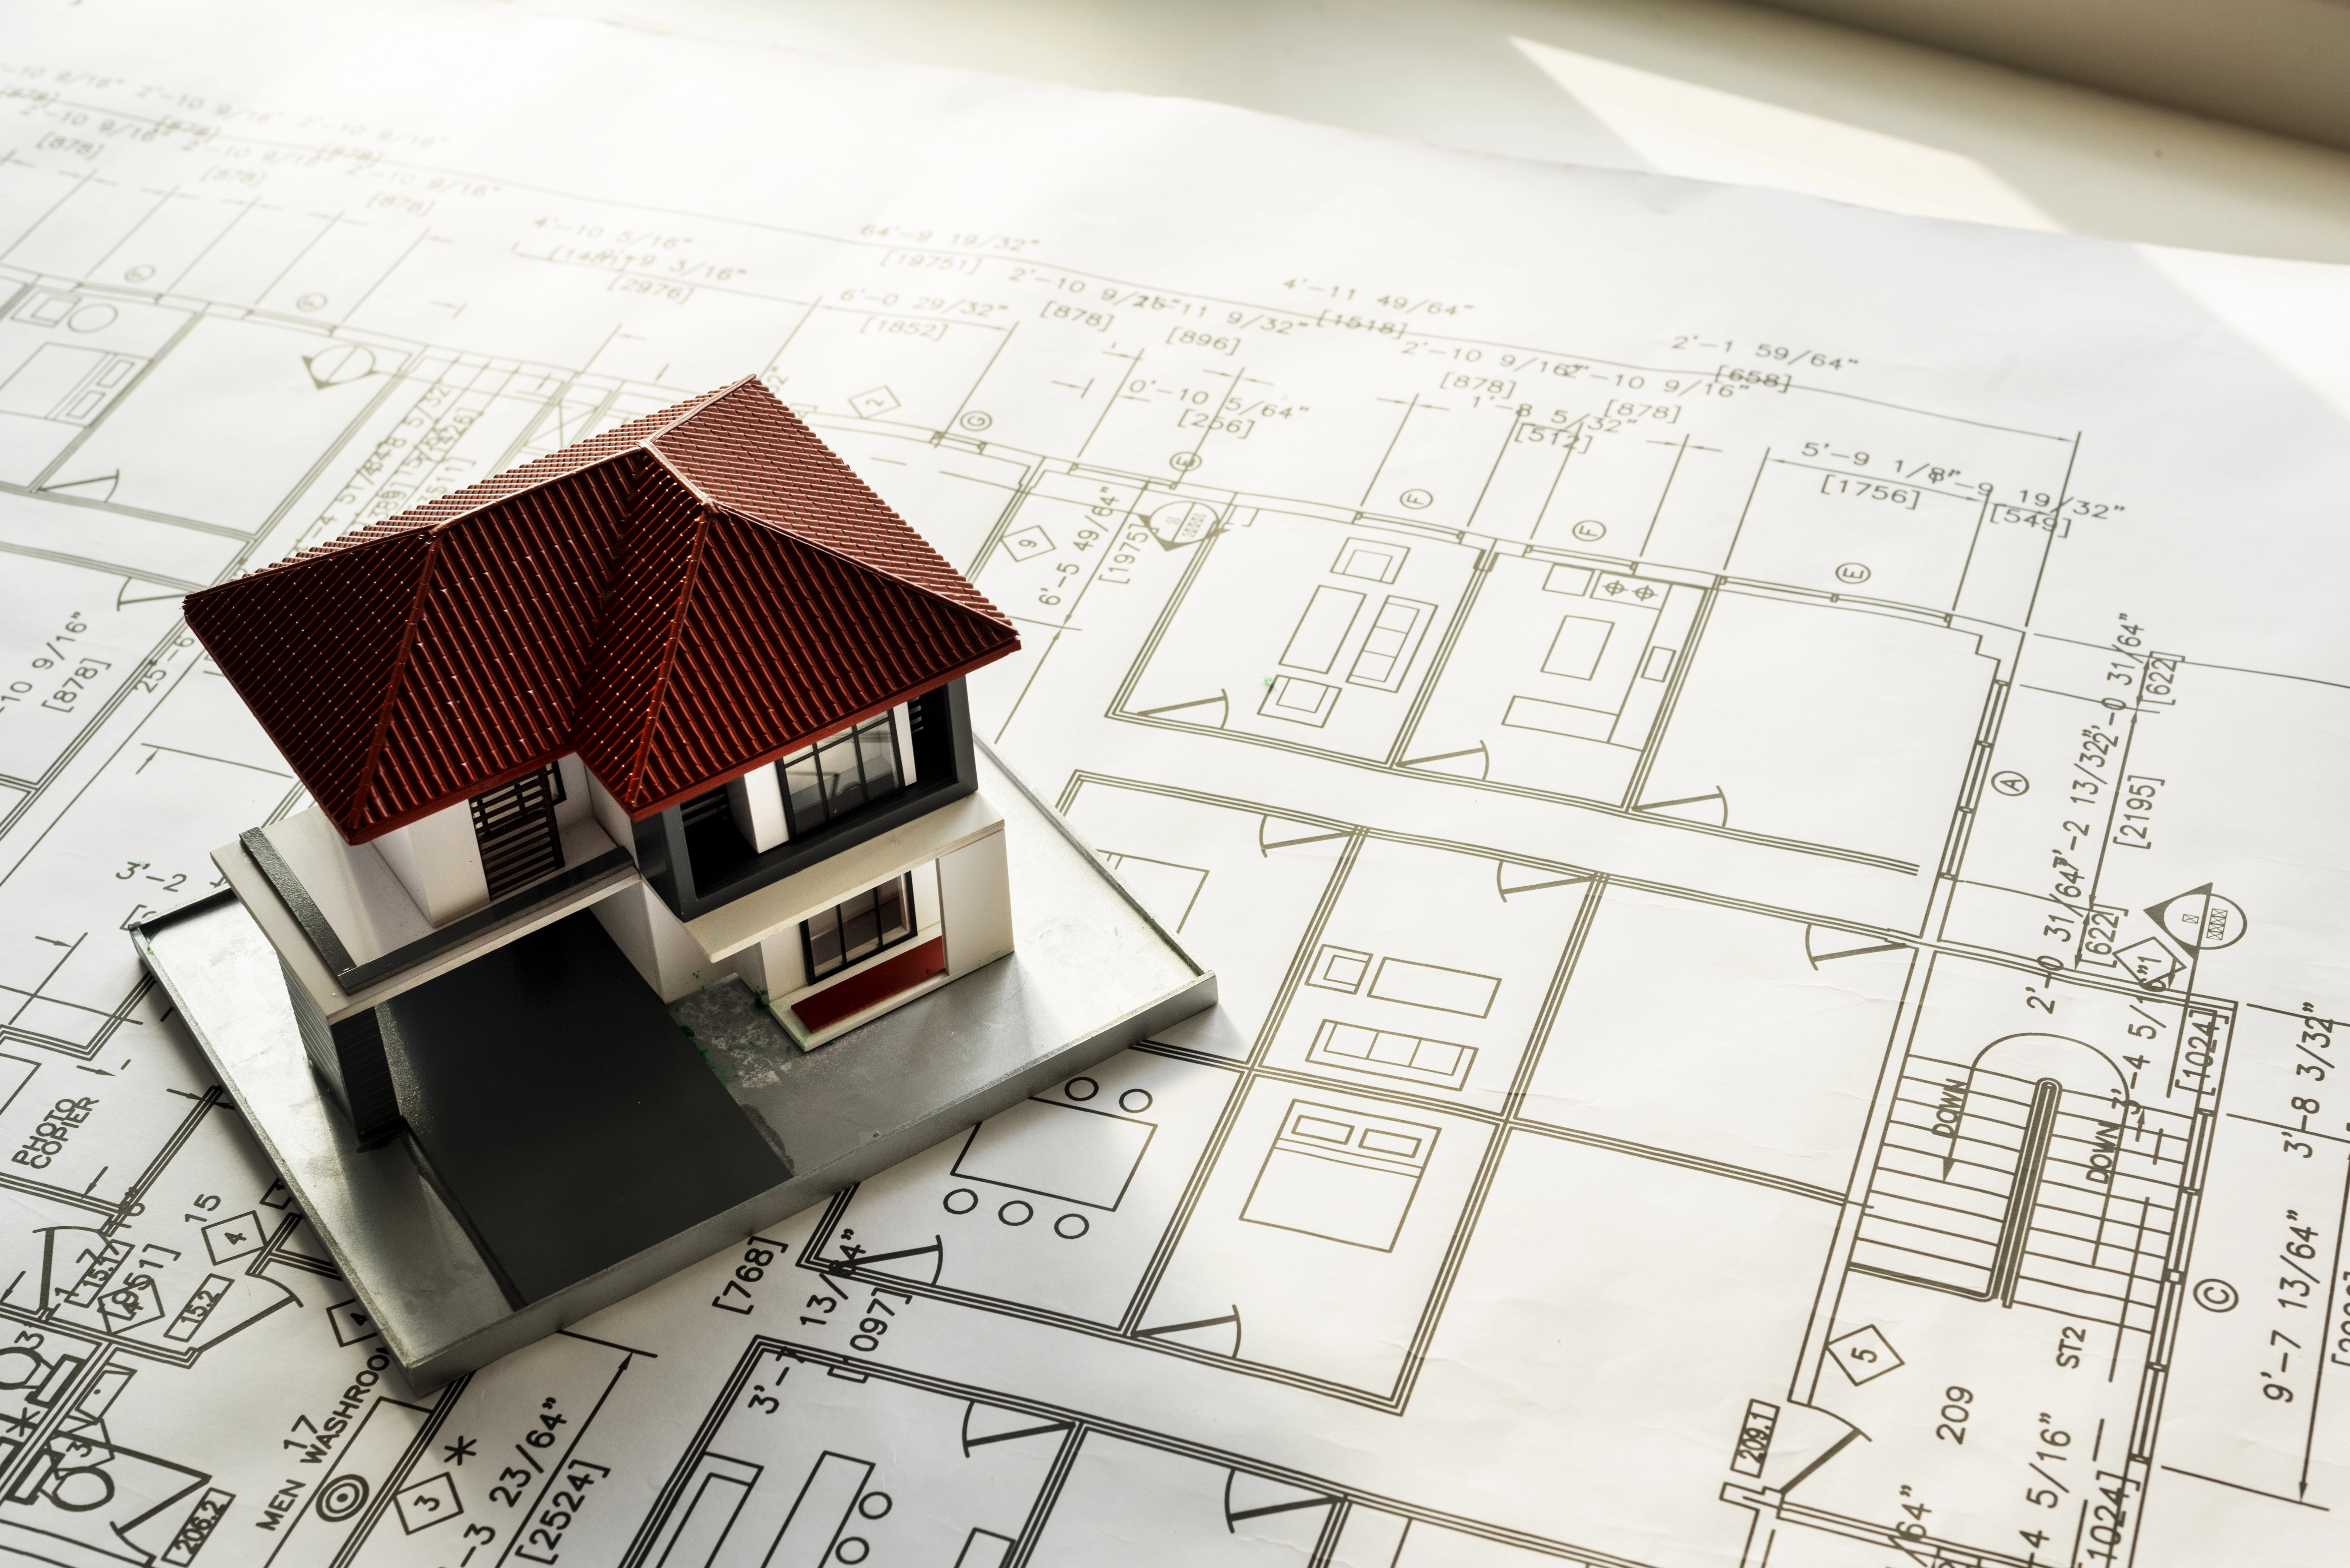 To buy a house well-matched to your requirements, understanding the floor plan and house drawings is a must.